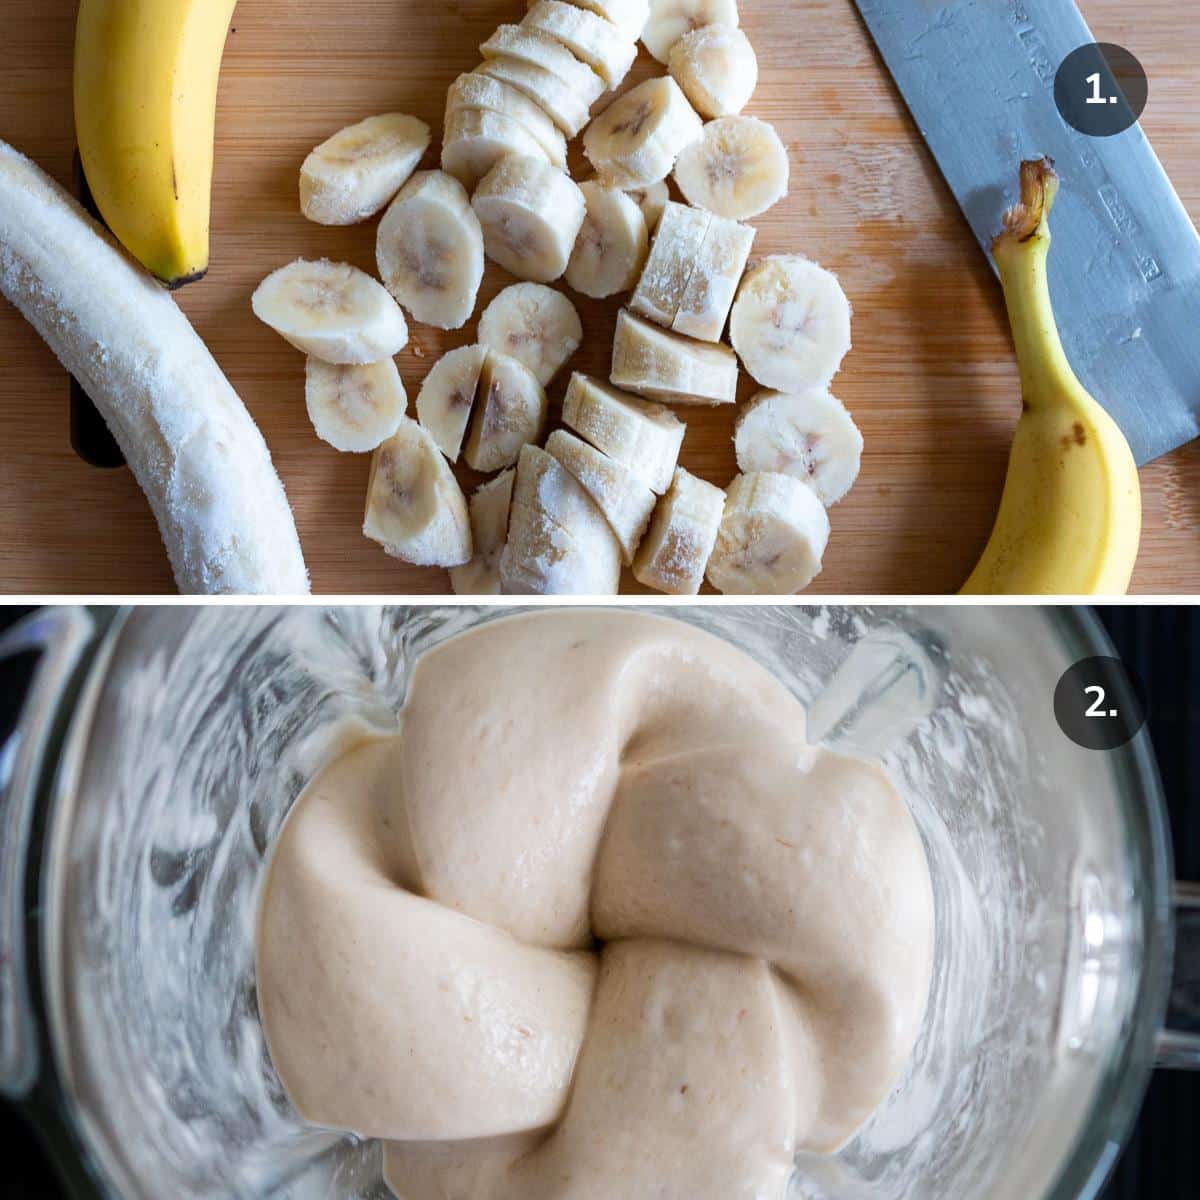 Chopping frozen bananas and blending with a little non-dairy milk.